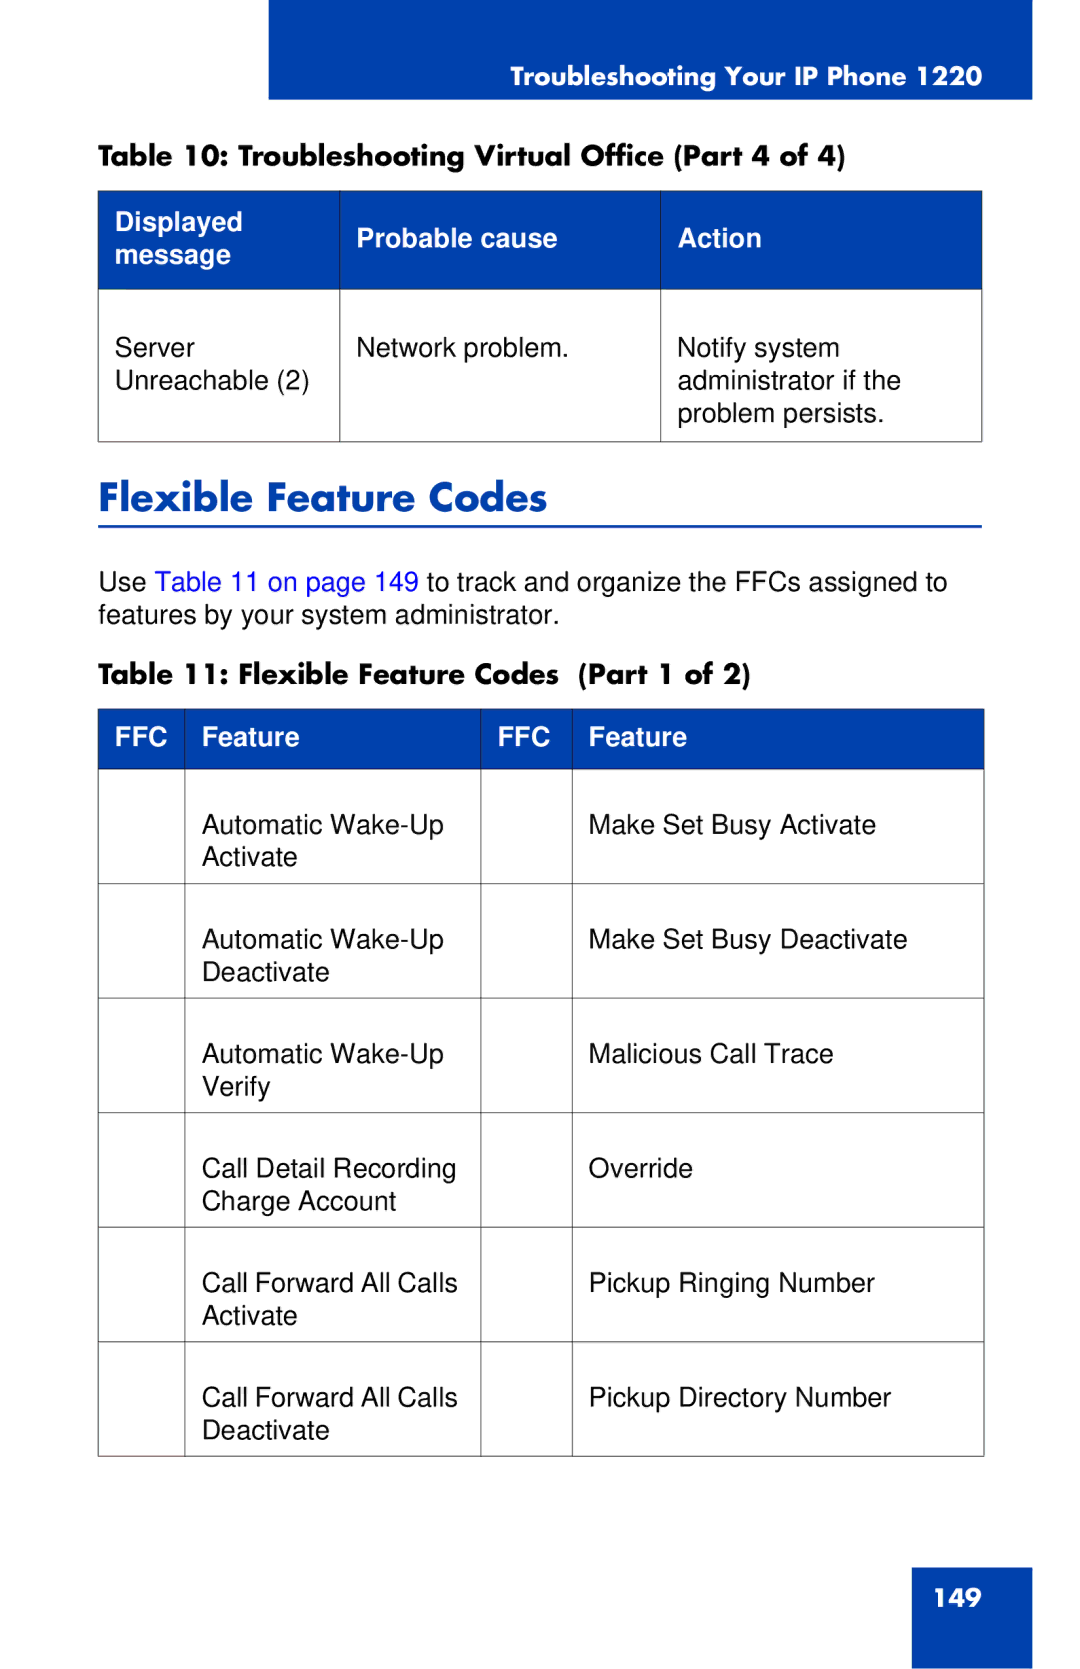 Nortel Networks IP Phone 1220 manual Flexible Feature Codes 